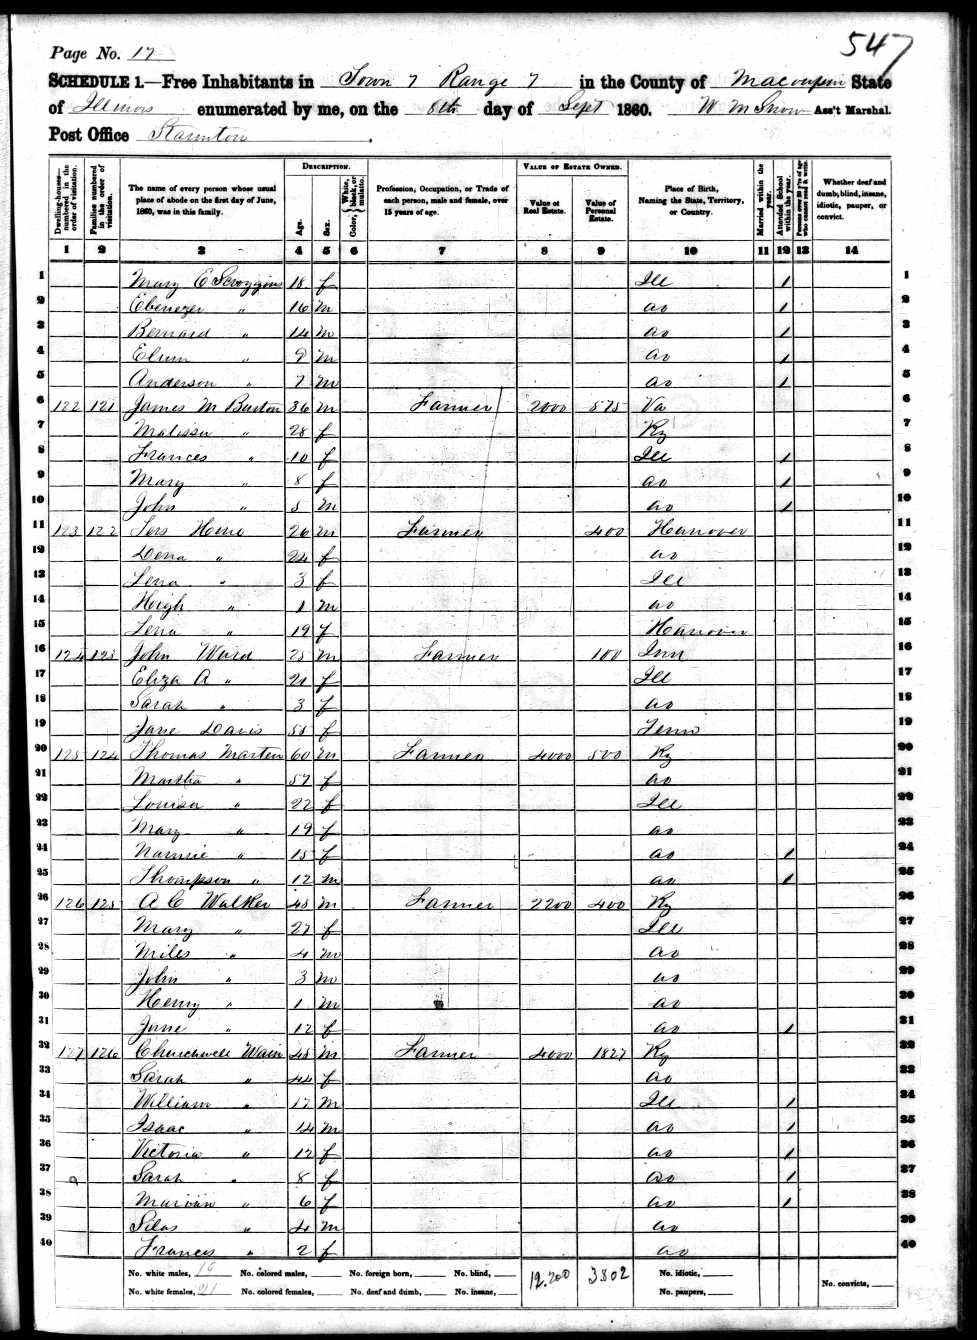 Archalus C. Walker, 1860 Macoupin County, Illinois, census